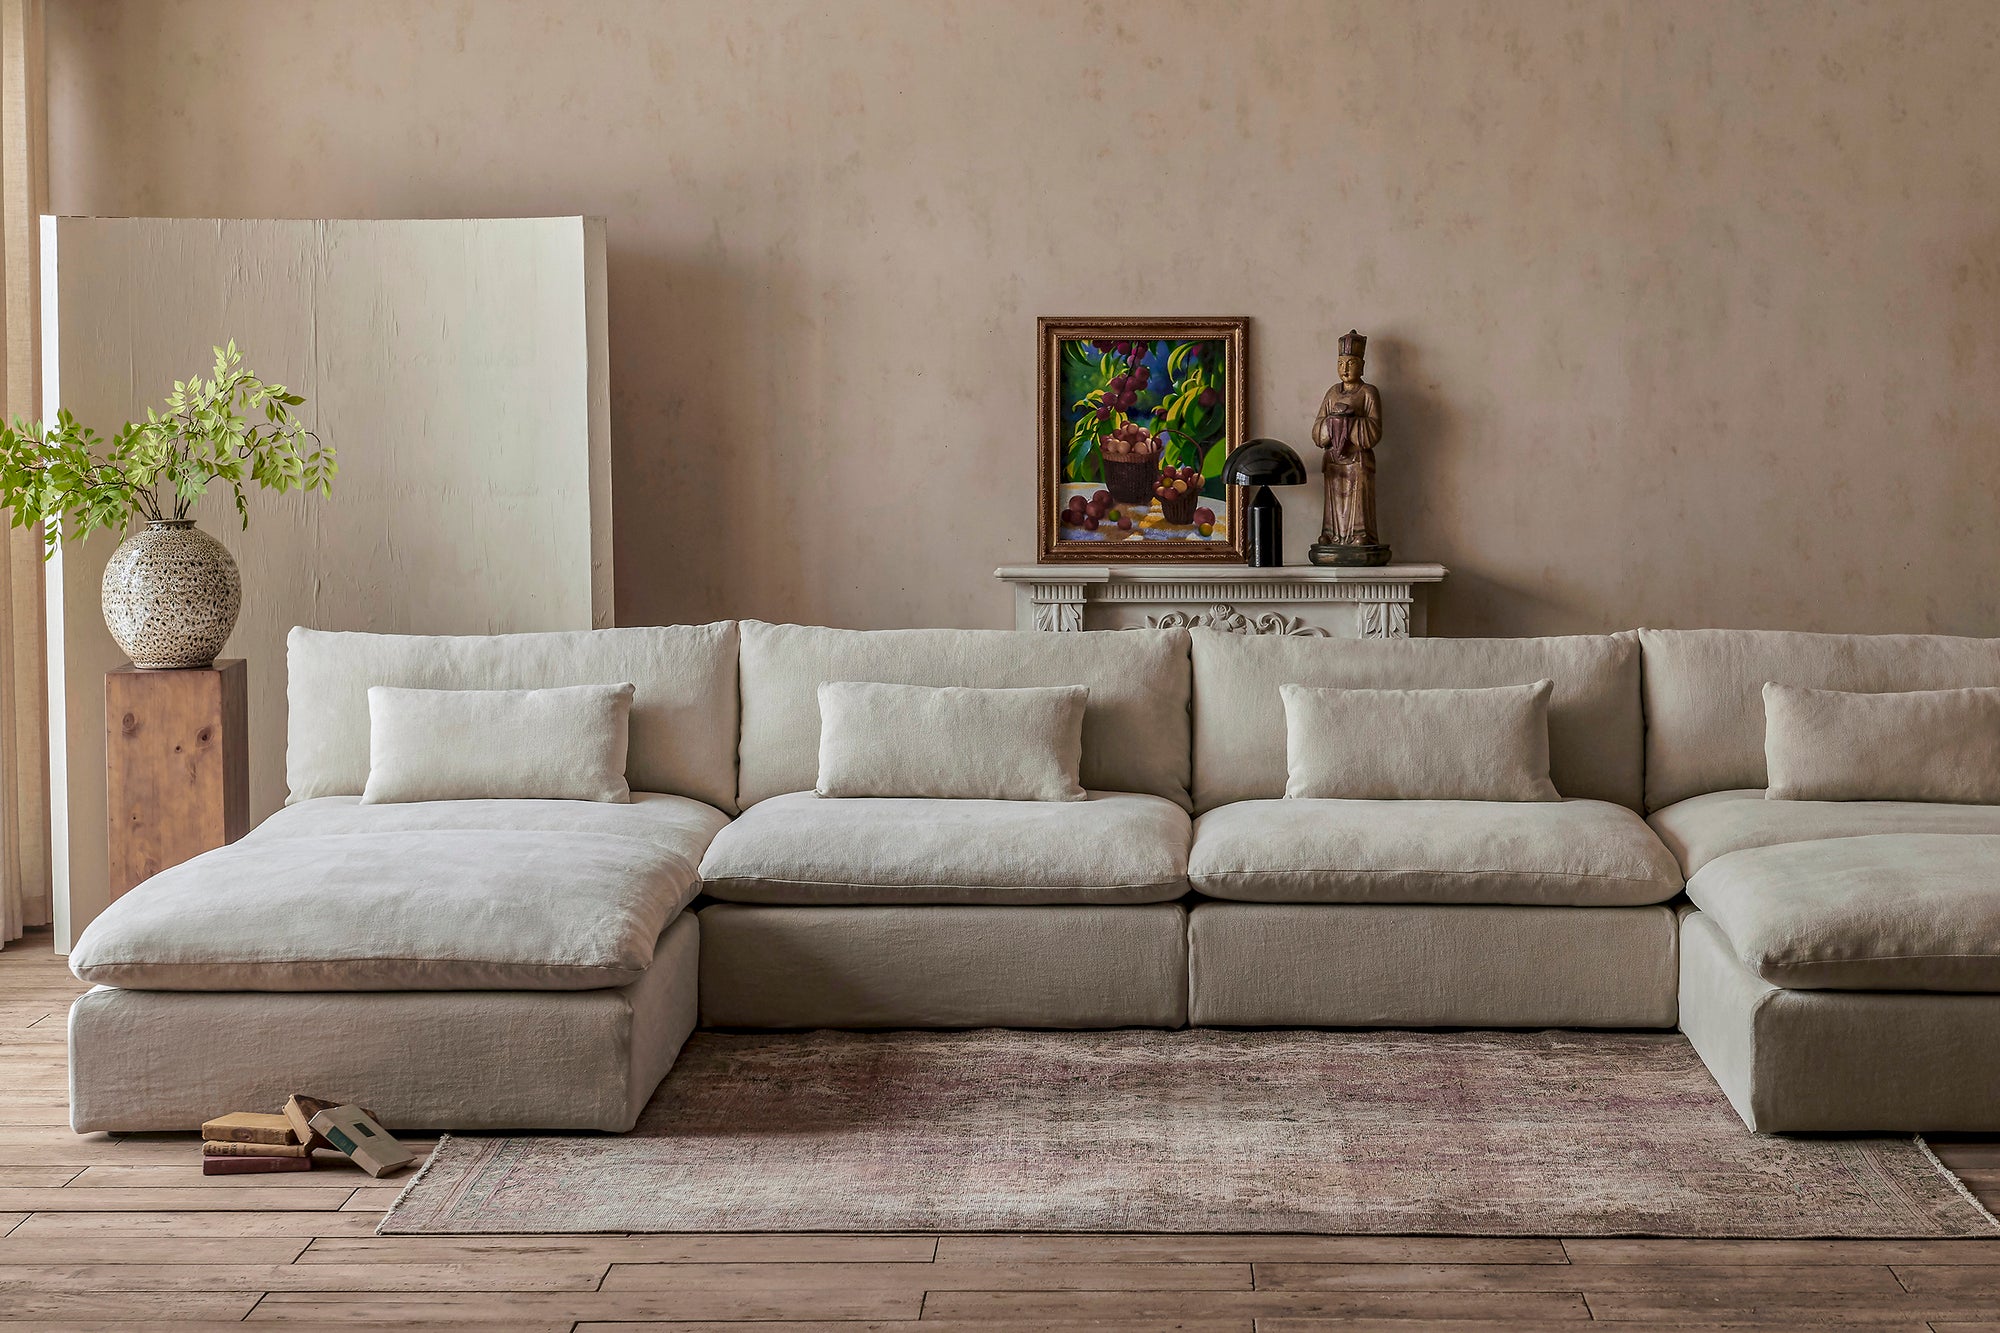 Aria Grande U-Shape Sectional Sofa in Warm Oatmeal, a light warm beige Medium Weight Linen, placed in a decorated room next to a potted plant on top of a pillar